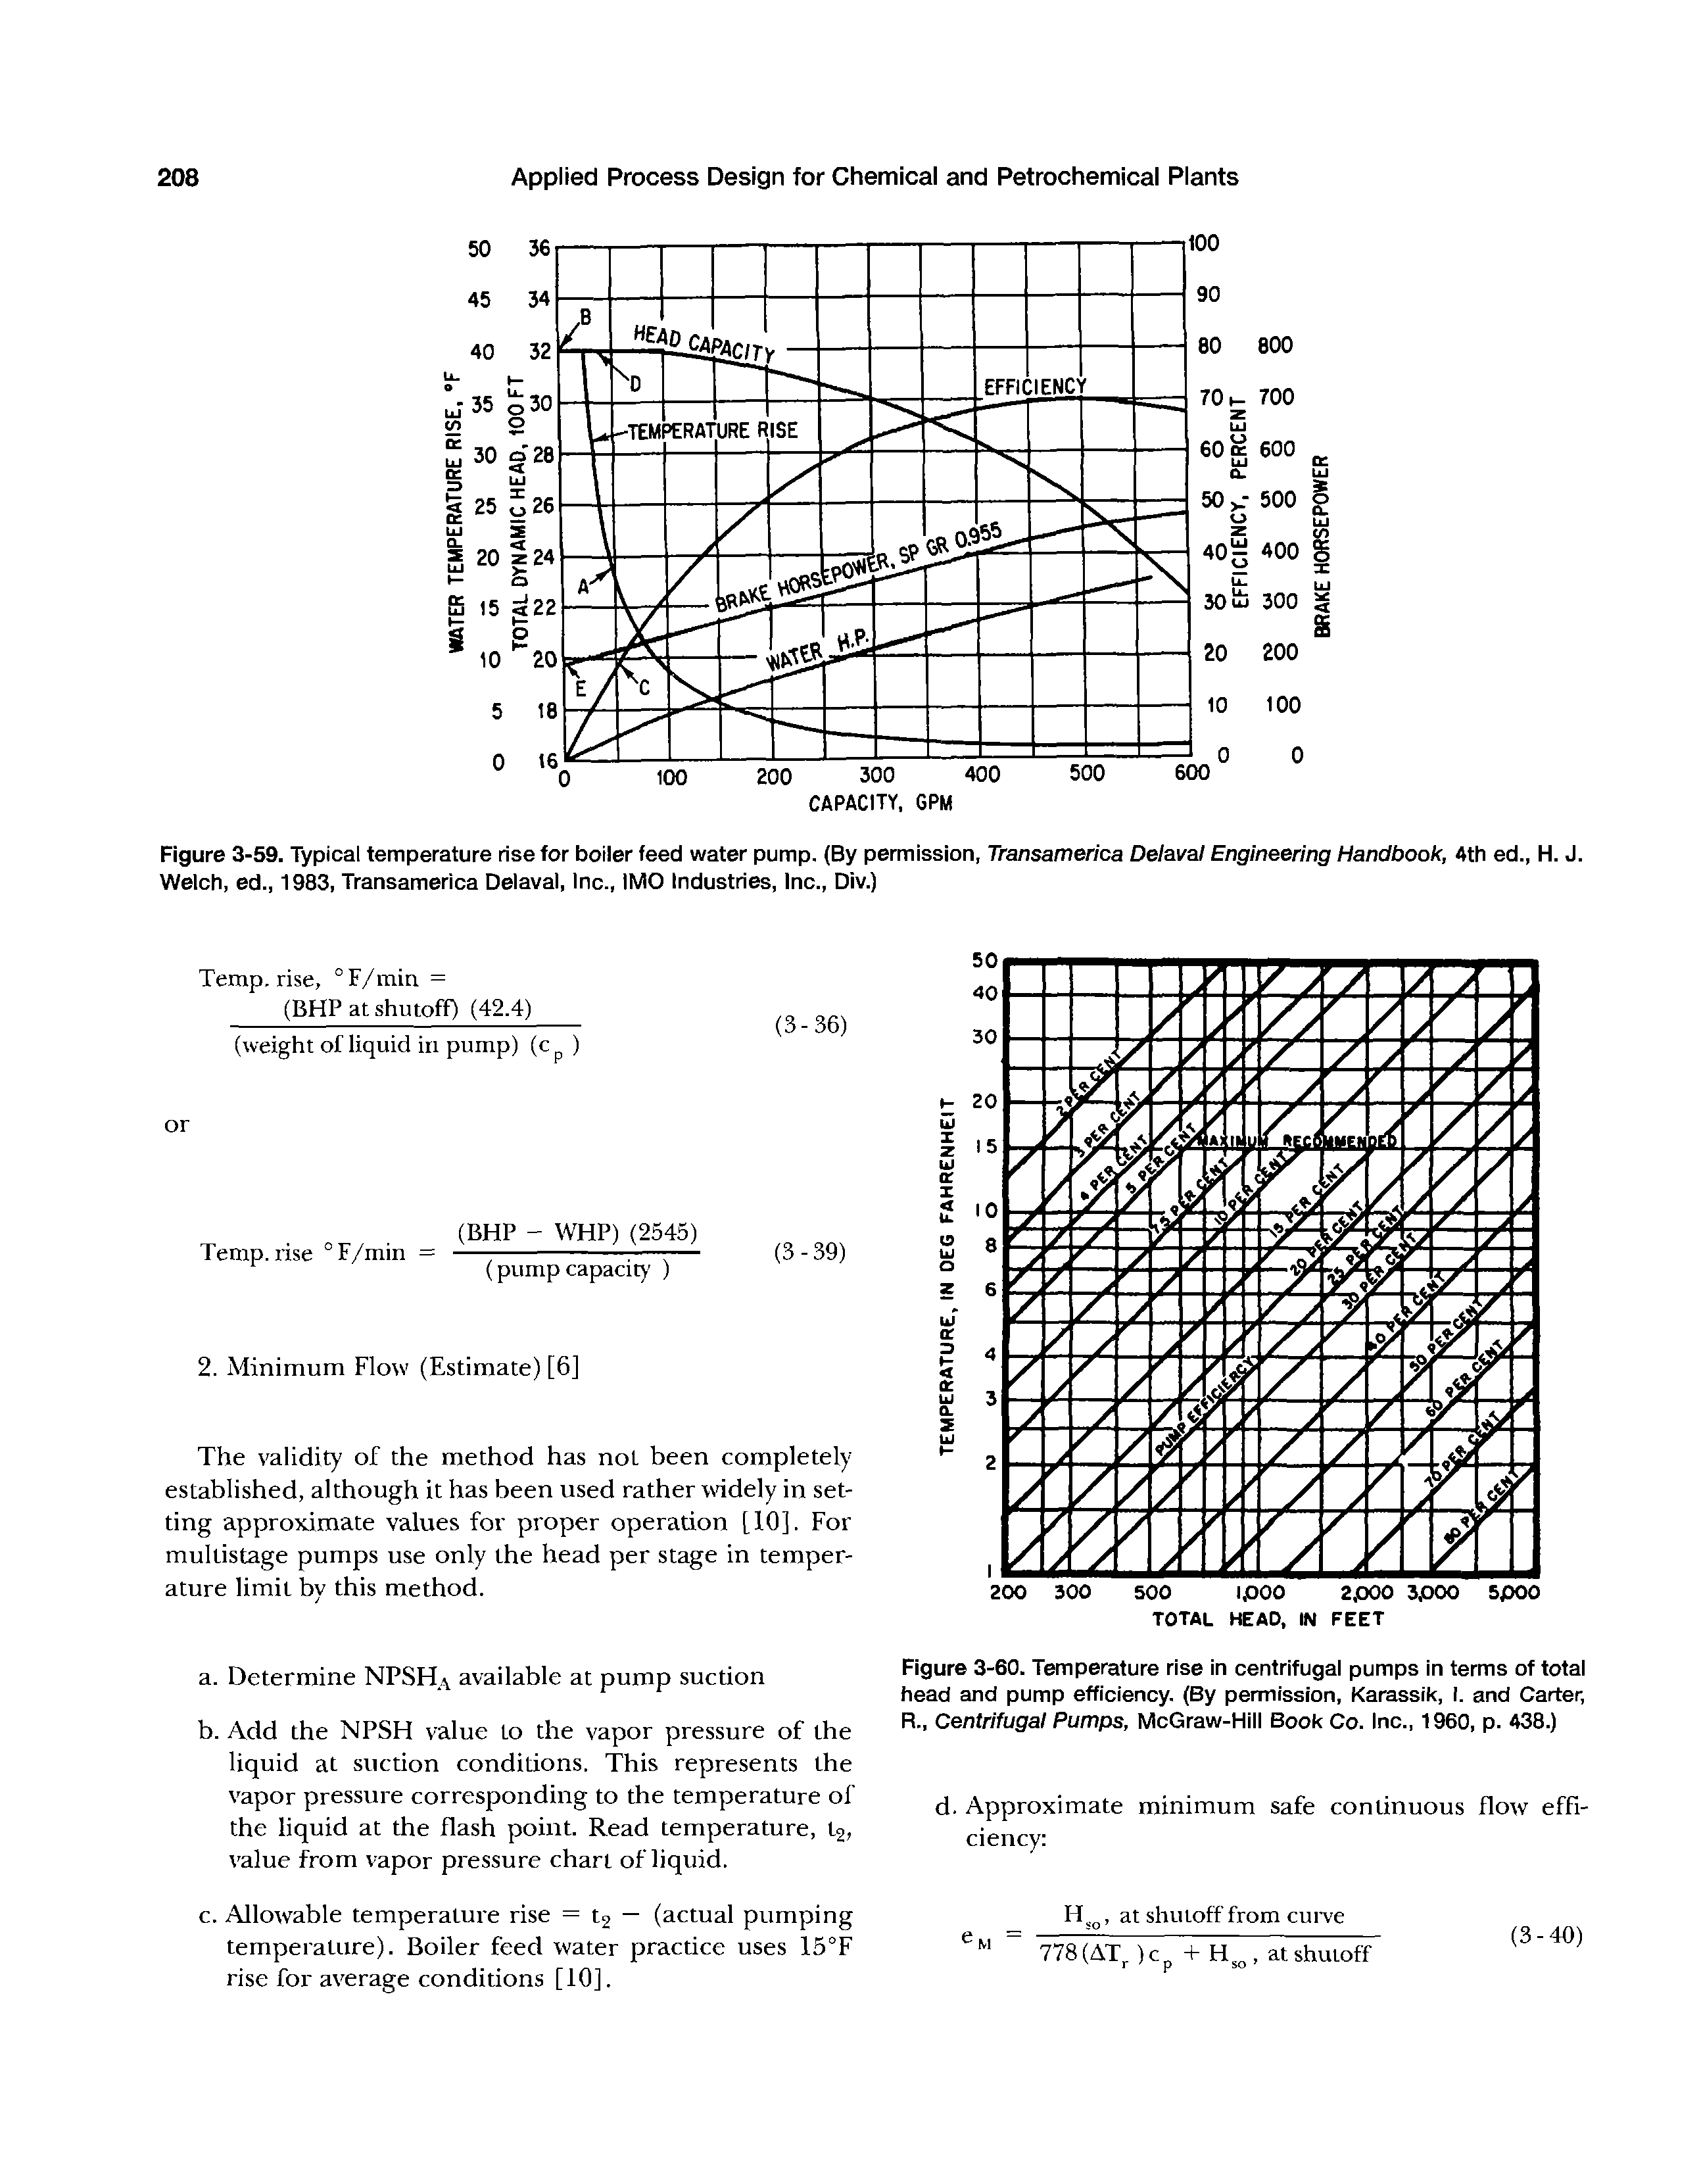 Figure 3-60. Temperature rise in centrifugal pumps in terms of total head and pump efficiency. (By permission, Karassik, I. and Carter, R., Centrifugai Pumps, McGraw-Hill Book Co. Inc., 1960, p. 438.)...